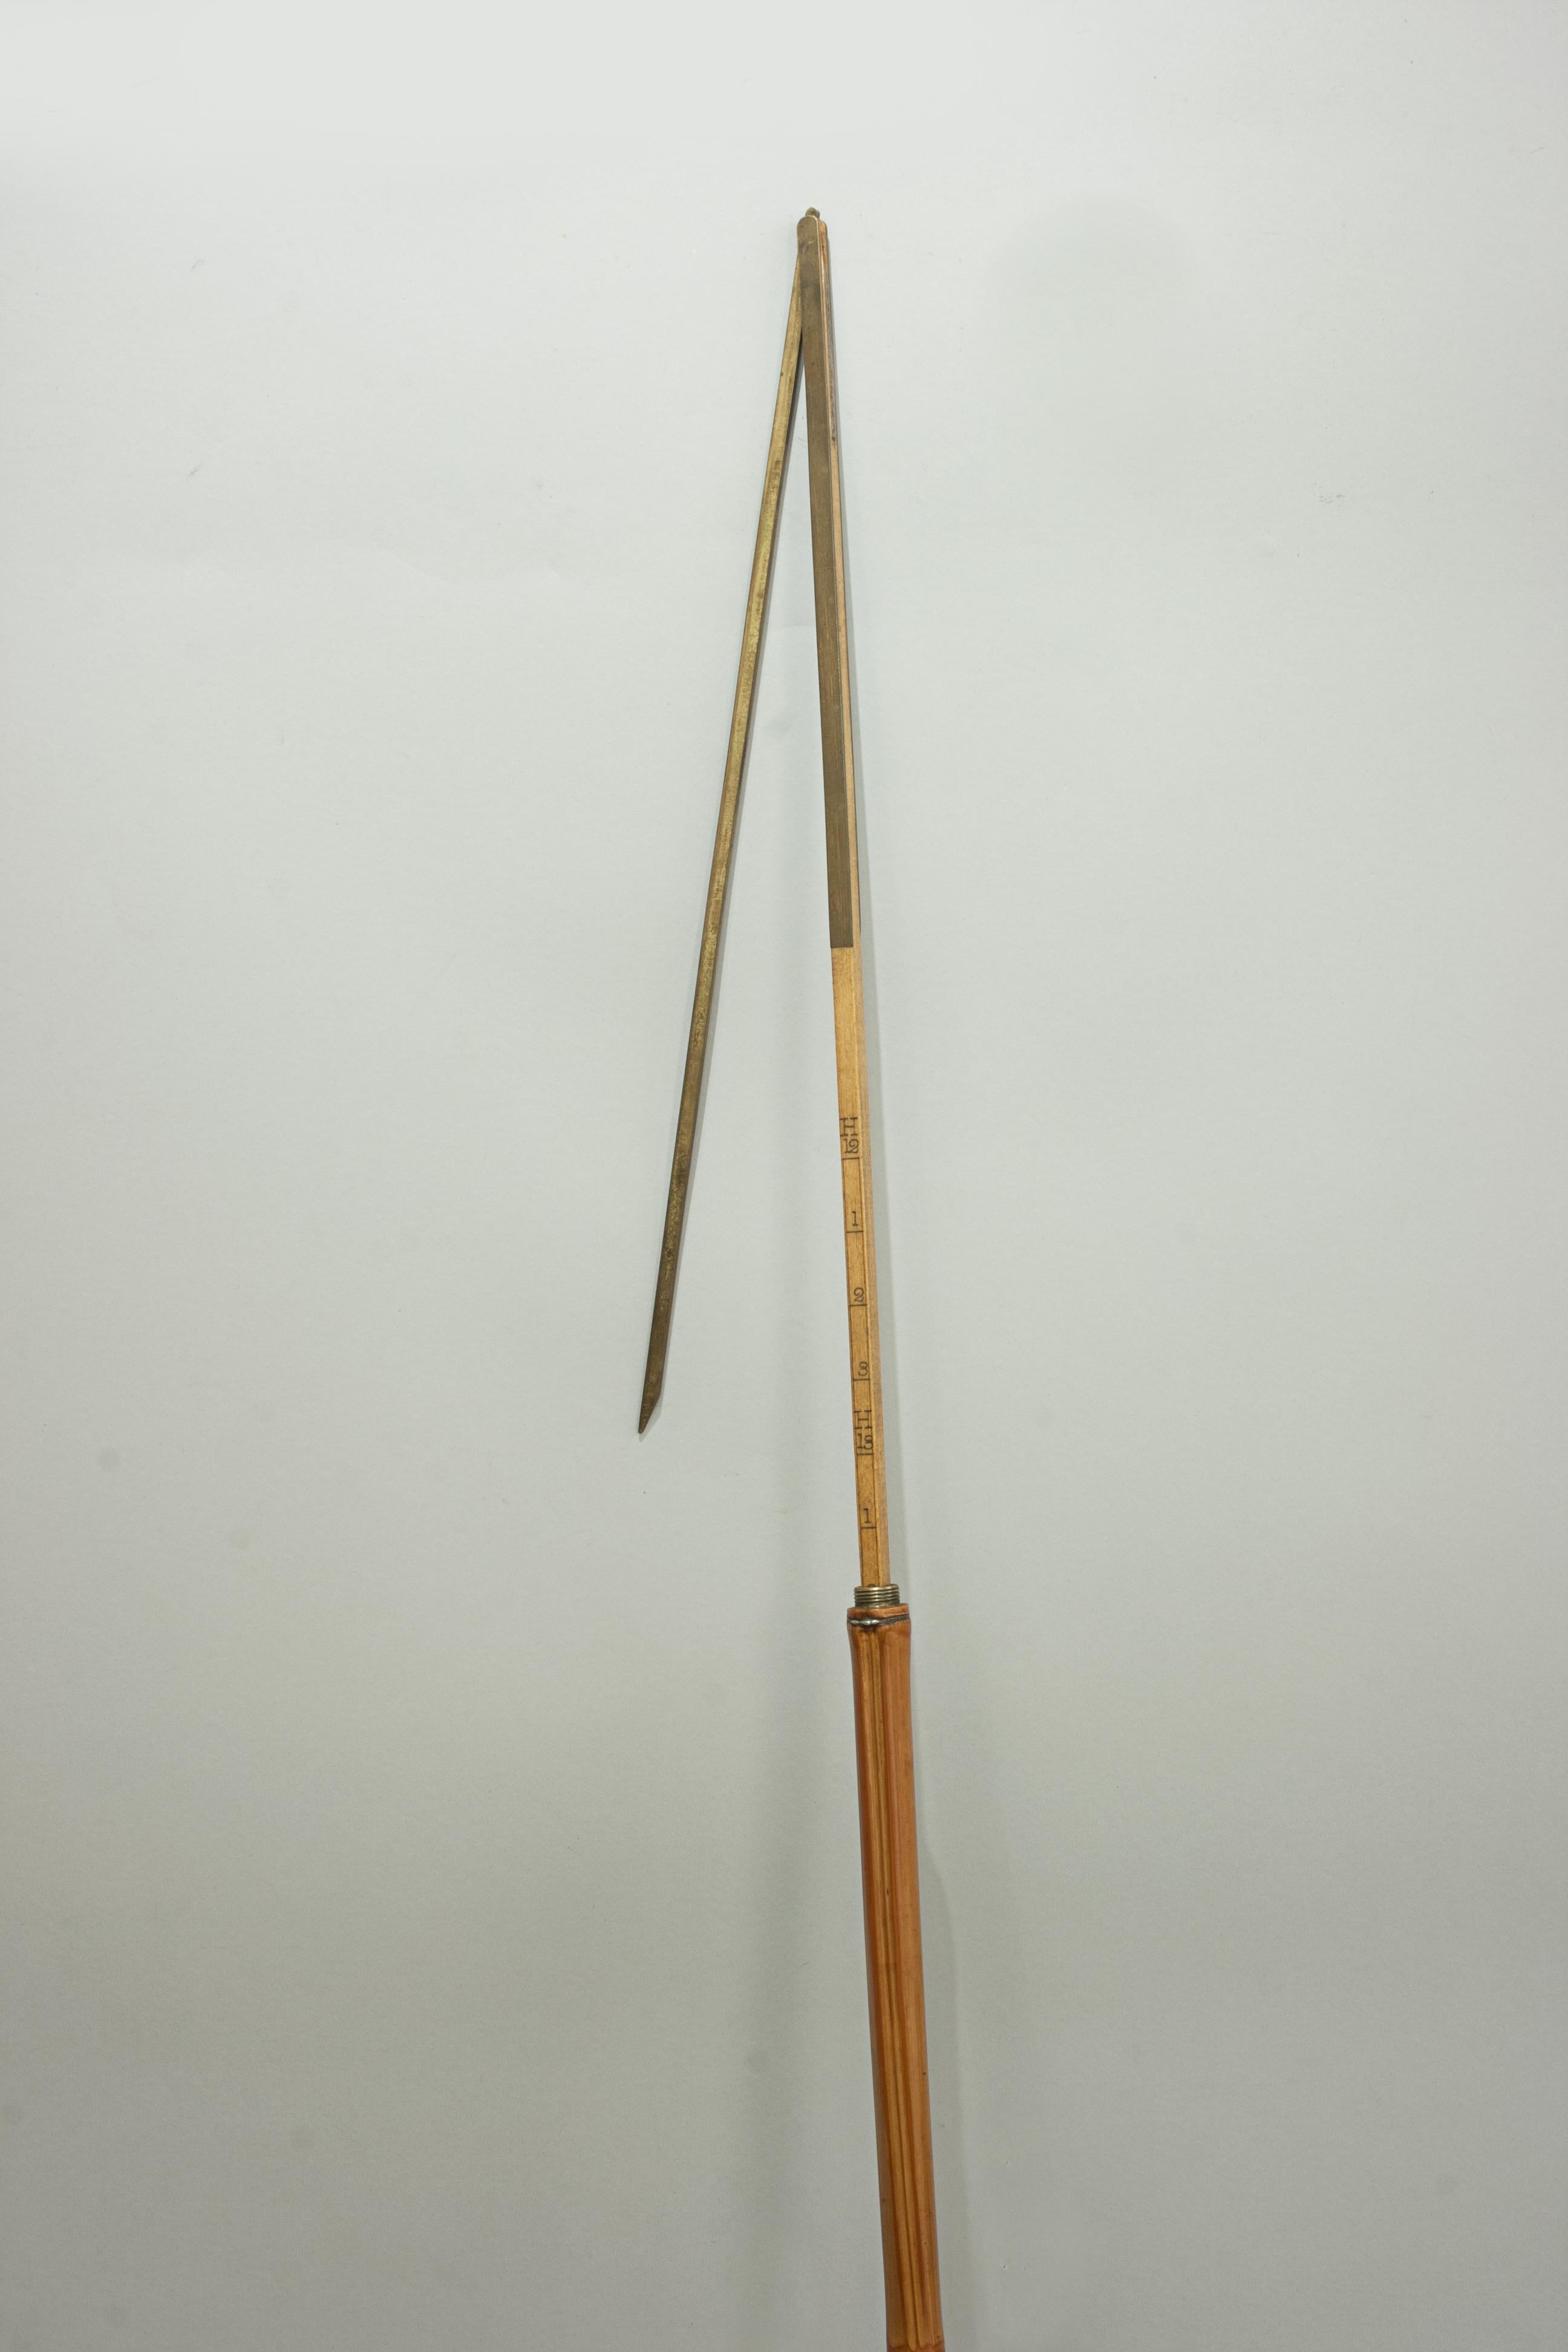 British Antique Horse Measure Stick by Arnold and Sons